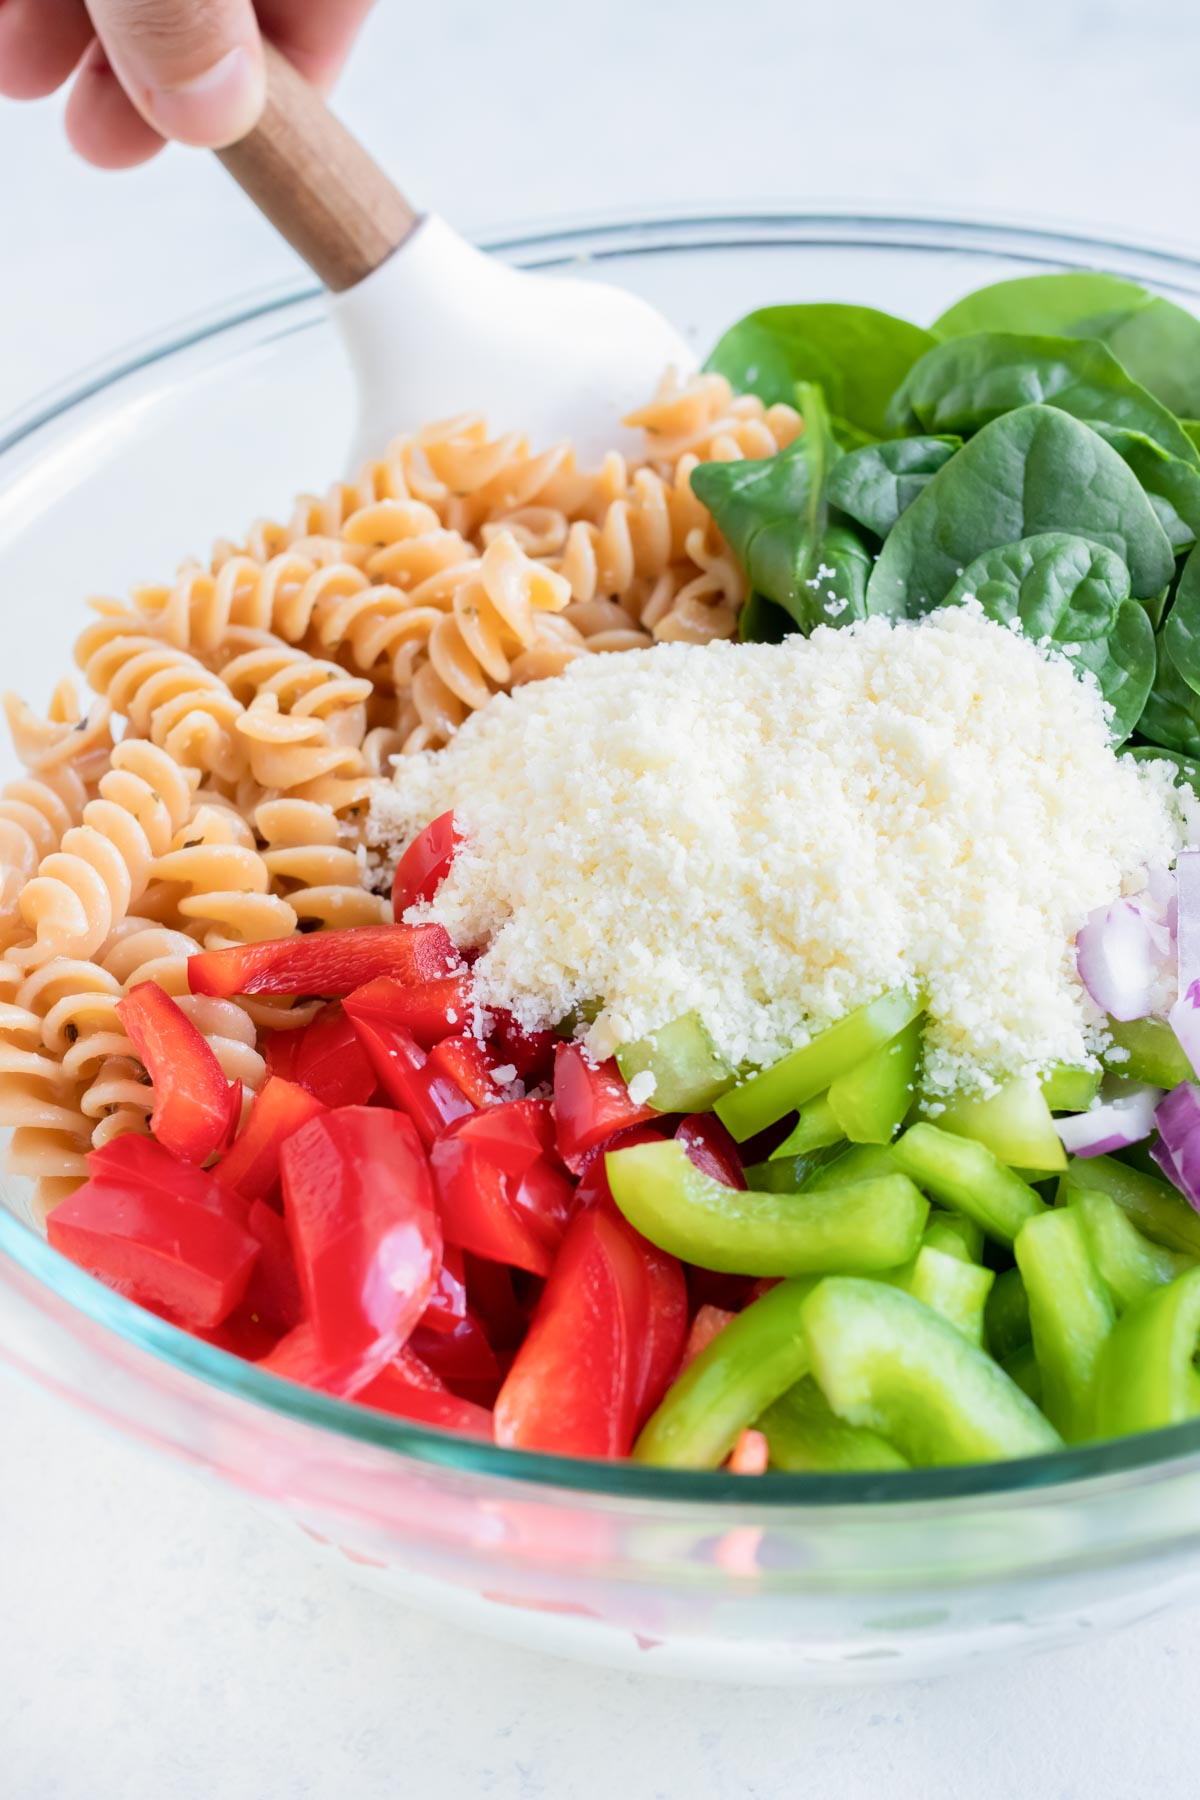 Chopped peppers, spinach, and Parmesan cheese are added to a bowl of noodles with Italian dressing.